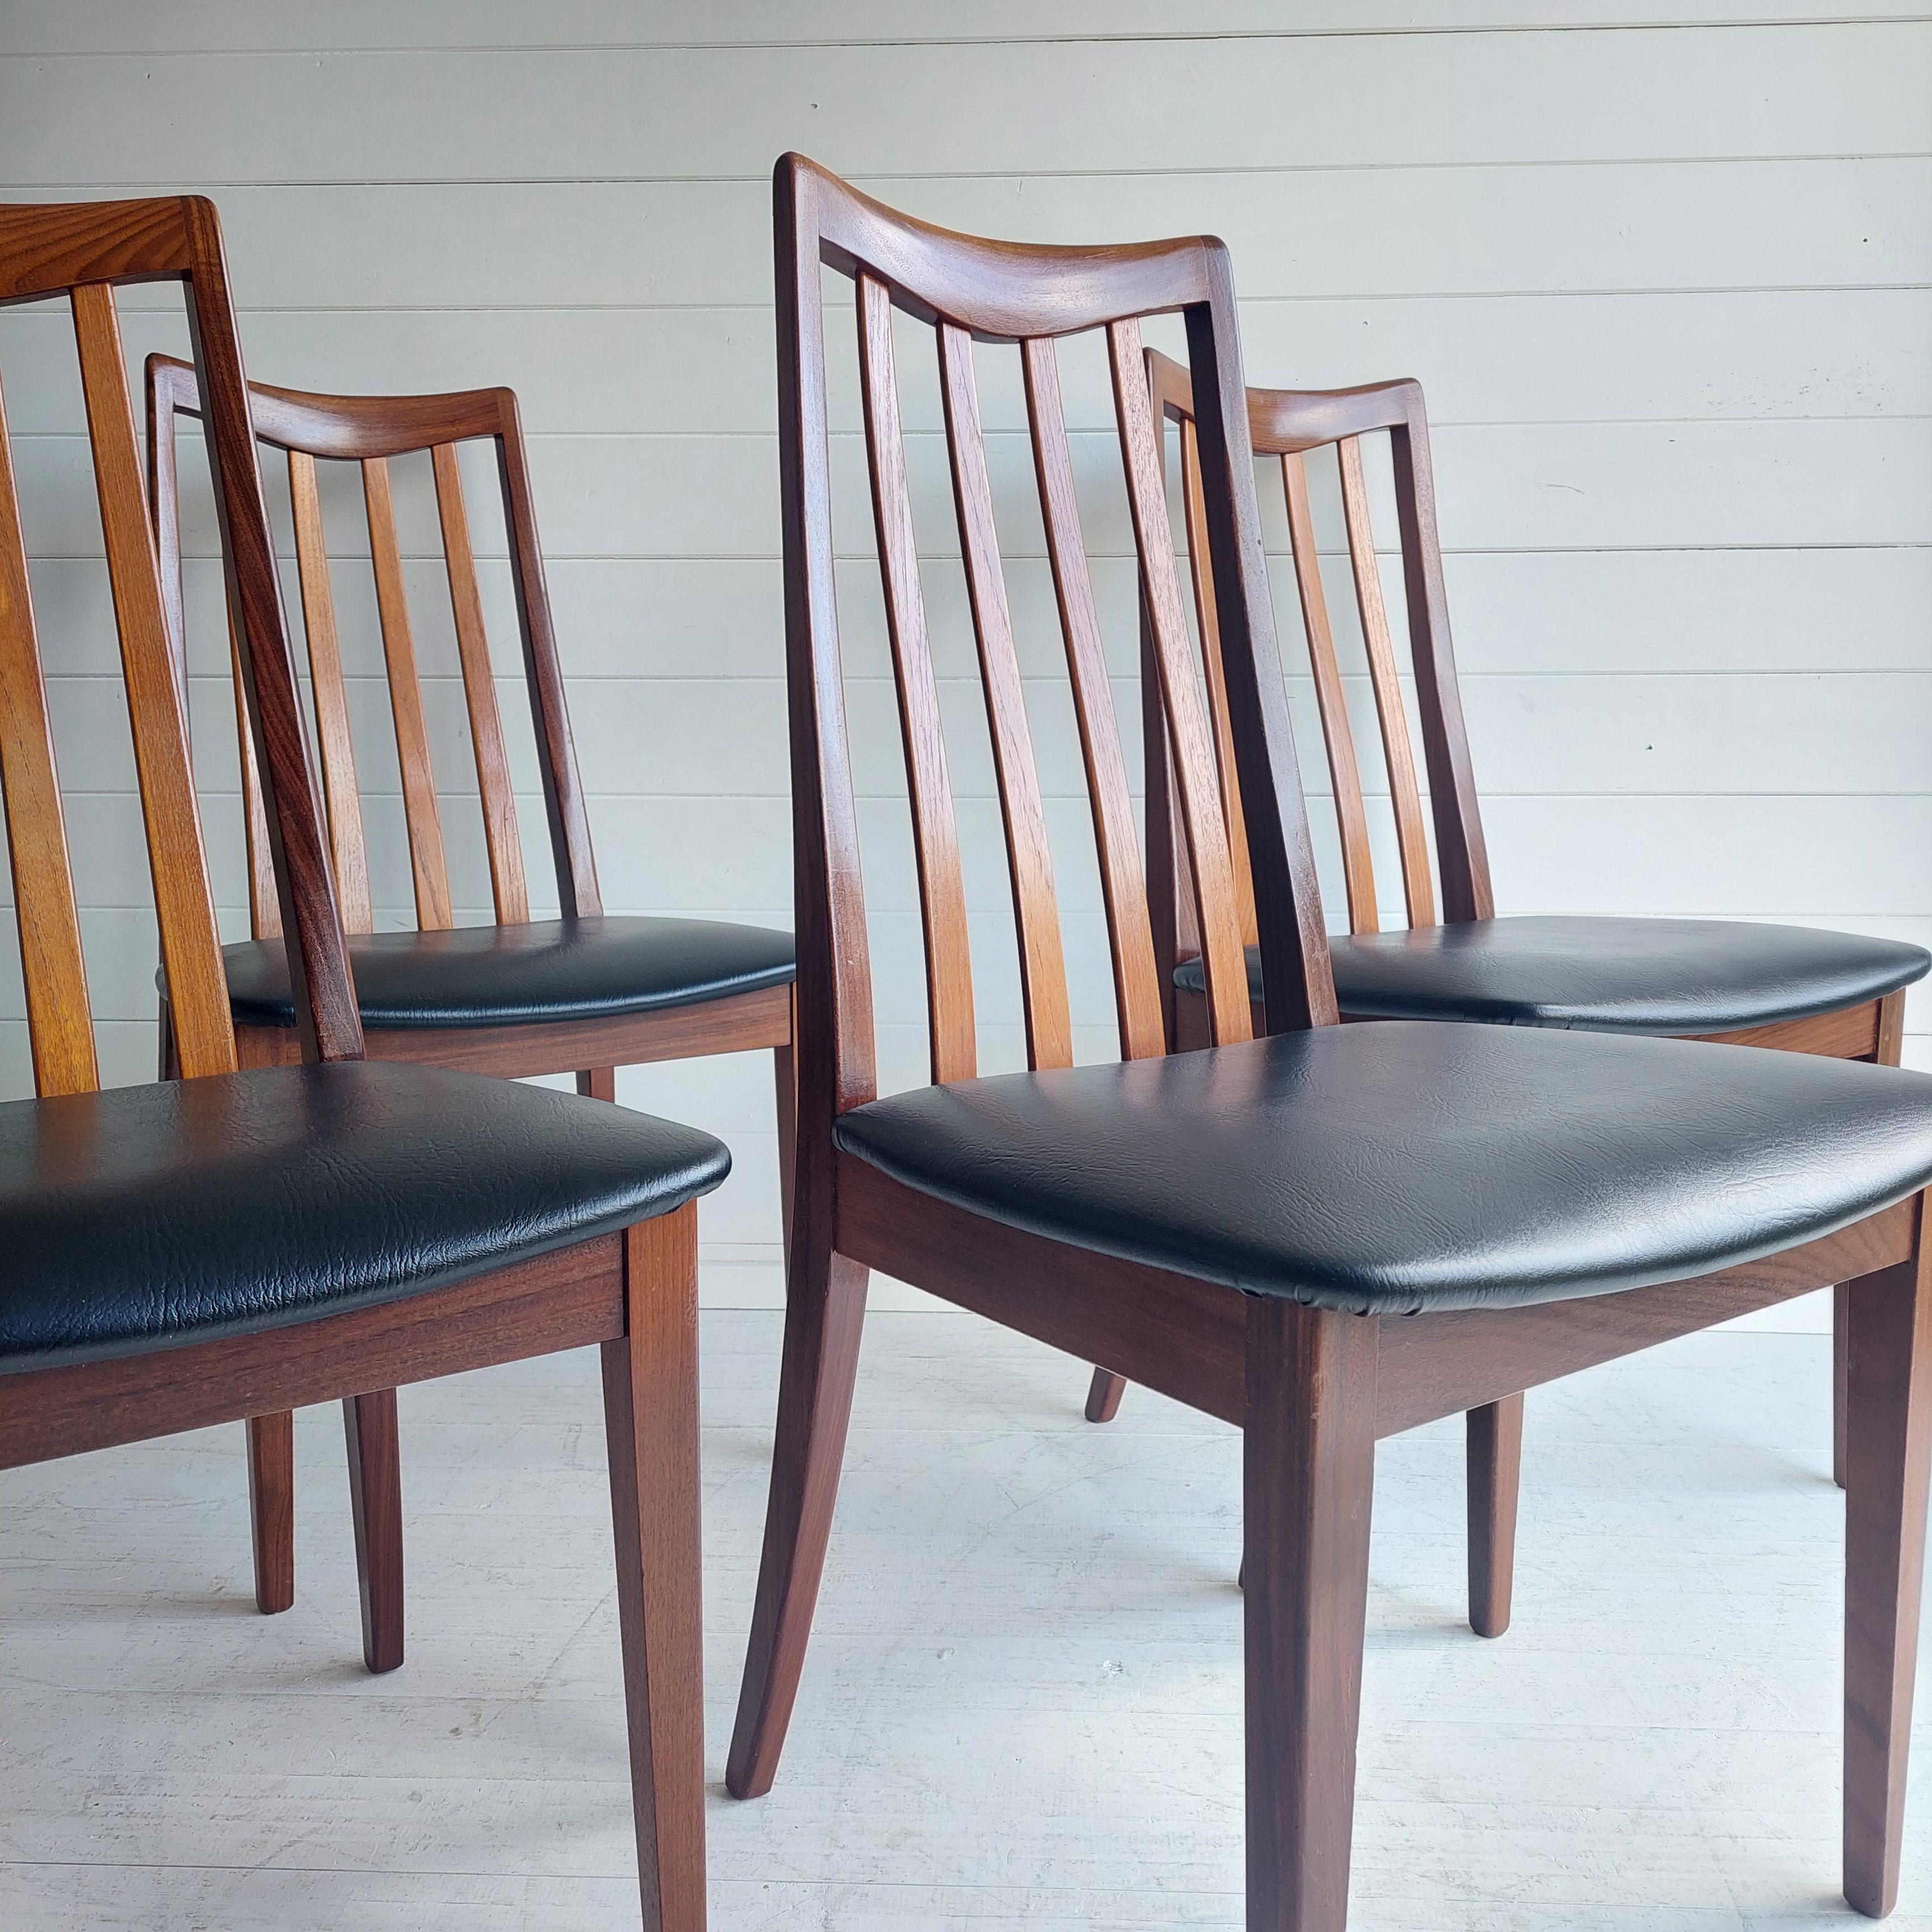 Stylish & sought after dining chairs, lovely rich solid teak chairs designed by Victor Bramwell Wilkins with stunning grain complemented with black faux leather seat pads. 
Fresco range dining chairs. Stunning midcentury design.
Very eye catching